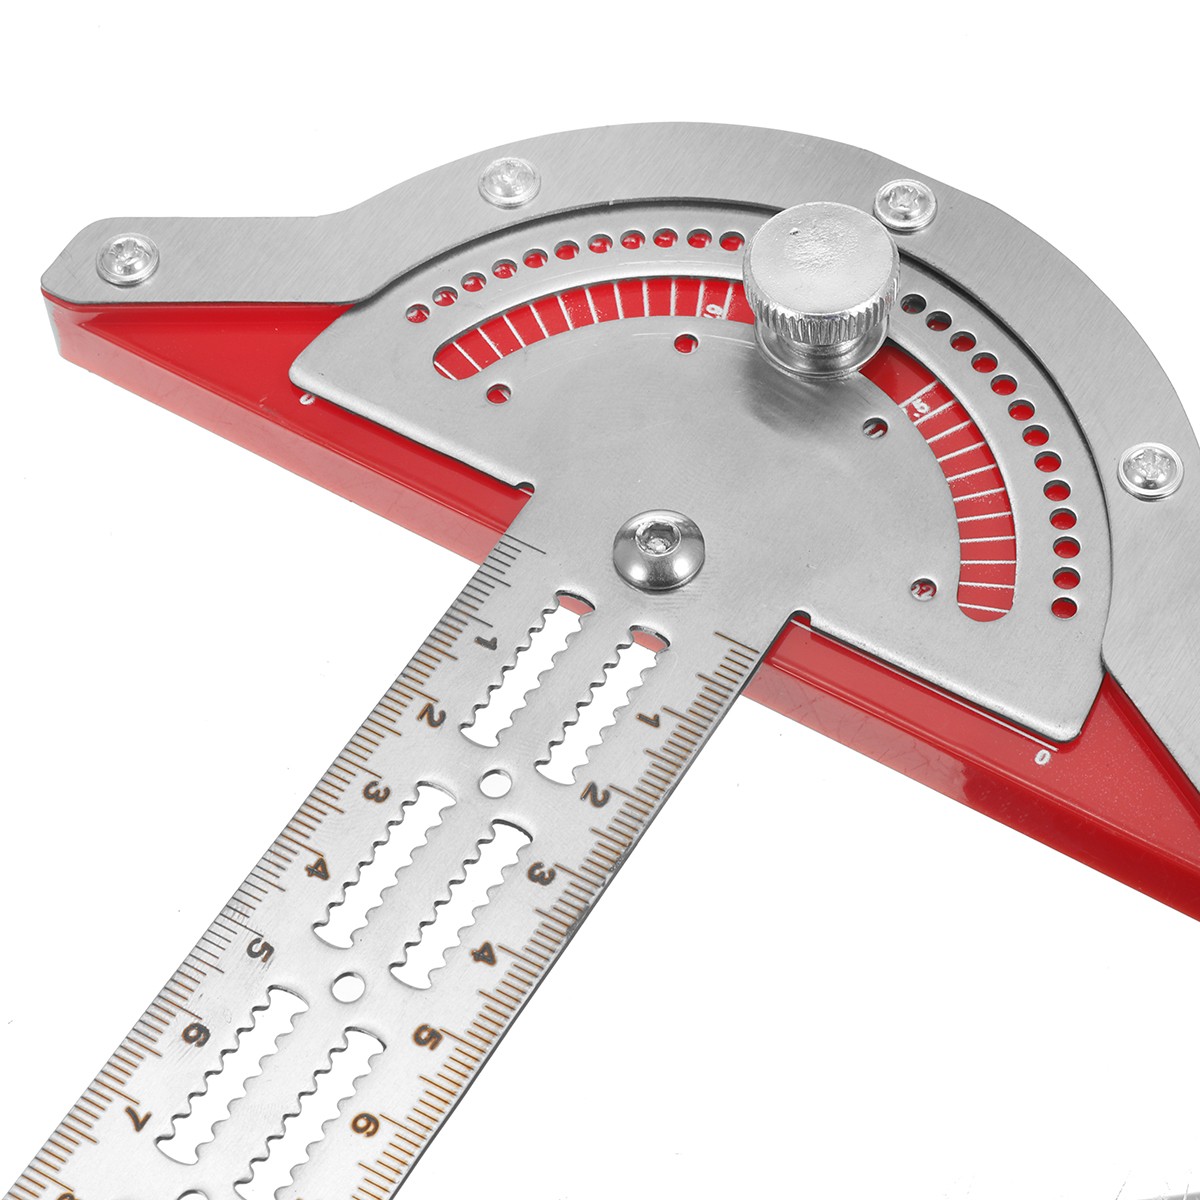 Stainless-Steel-Edge-Ruler-Protractor-Woodworking-Ruler-Angle-Measuring-Tool-Precision-Carpenter-Too-1923789-8